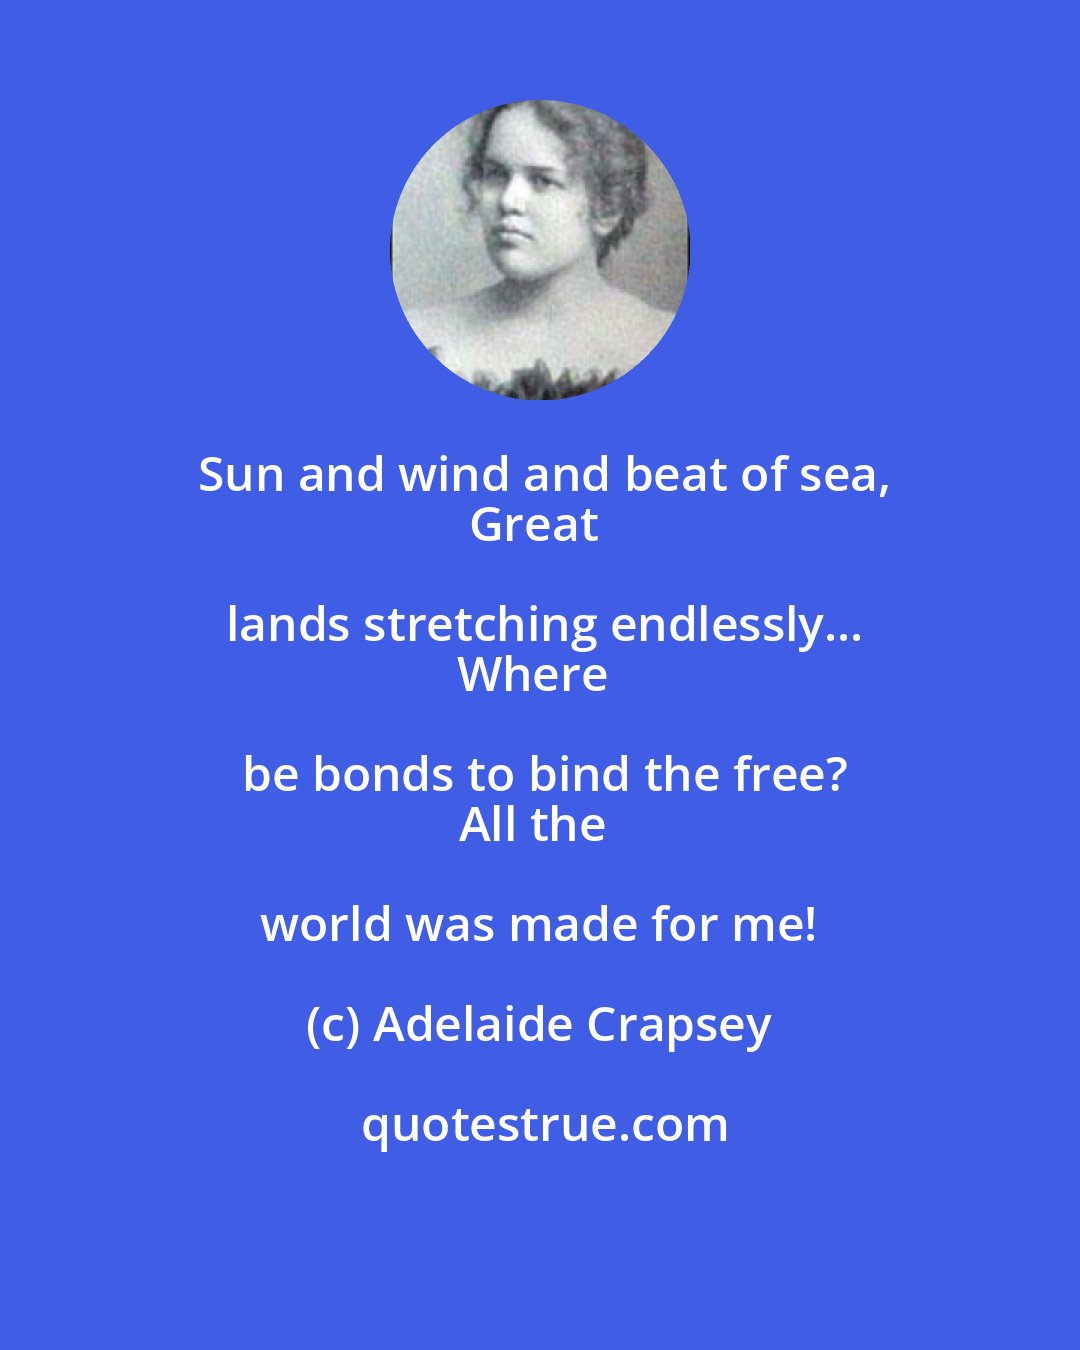 Adelaide Crapsey: Sun and wind and beat of sea,
Great lands stretching endlessly...
Where be bonds to bind the free?
All the world was made for me!